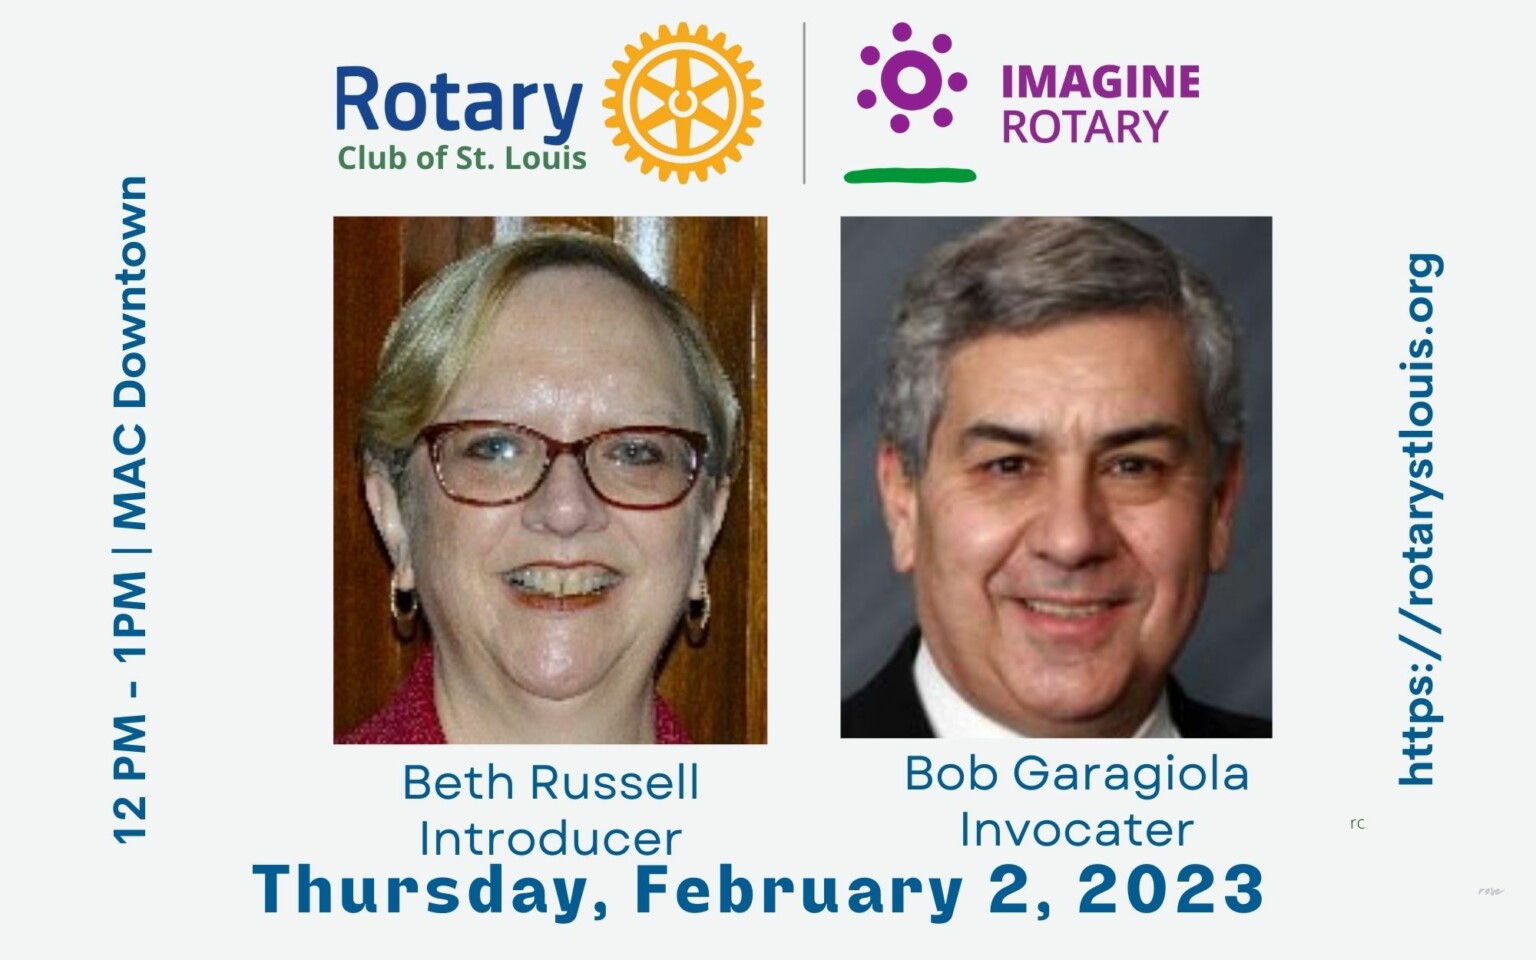 Beth Russell, Introducer and Bob Garagiola, Invocator 2-2-23 at St. Louis Rotary Club